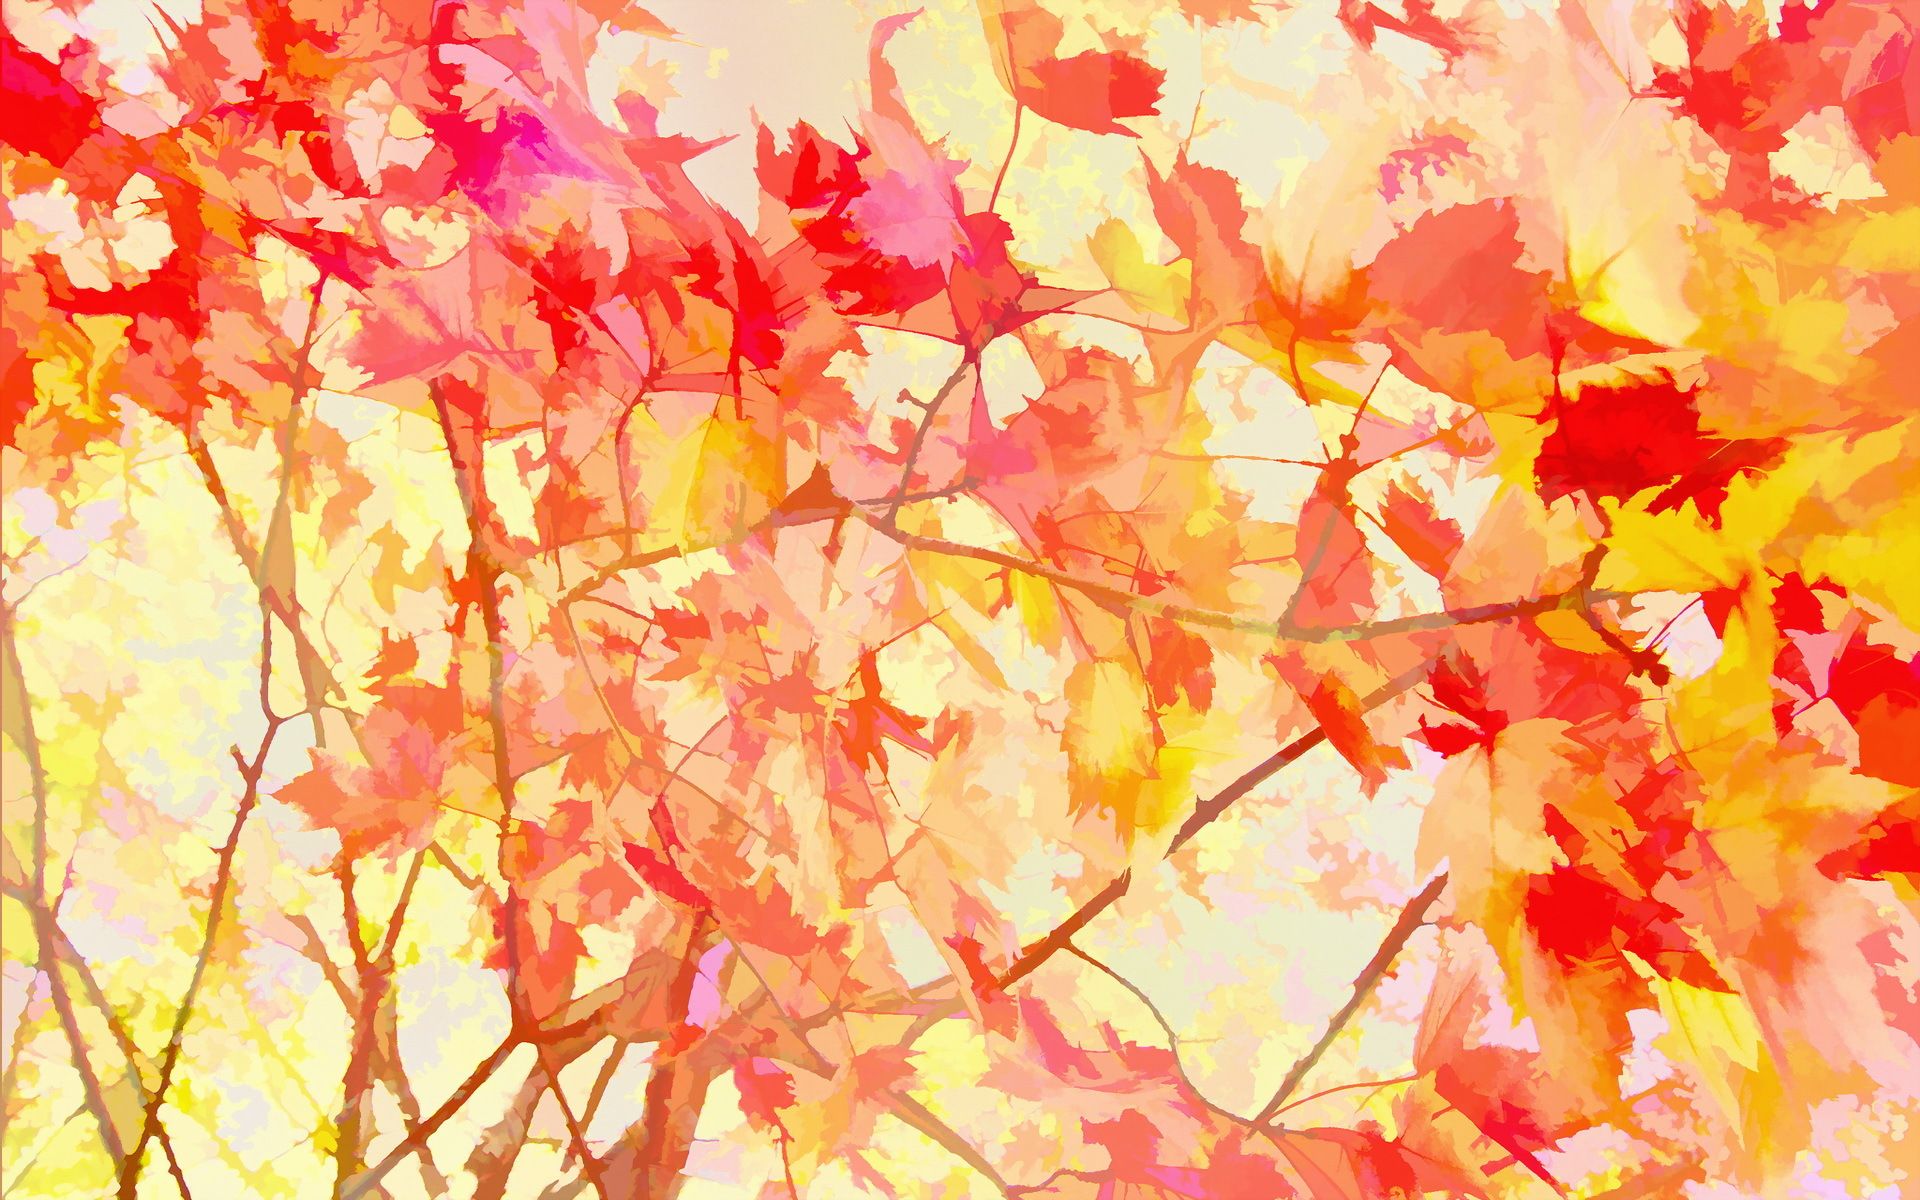 Fall Watercolor Wallpaper & Background Beautiful Best Available For Download Fall Watercolor Photo Free On Zicxa.com Image